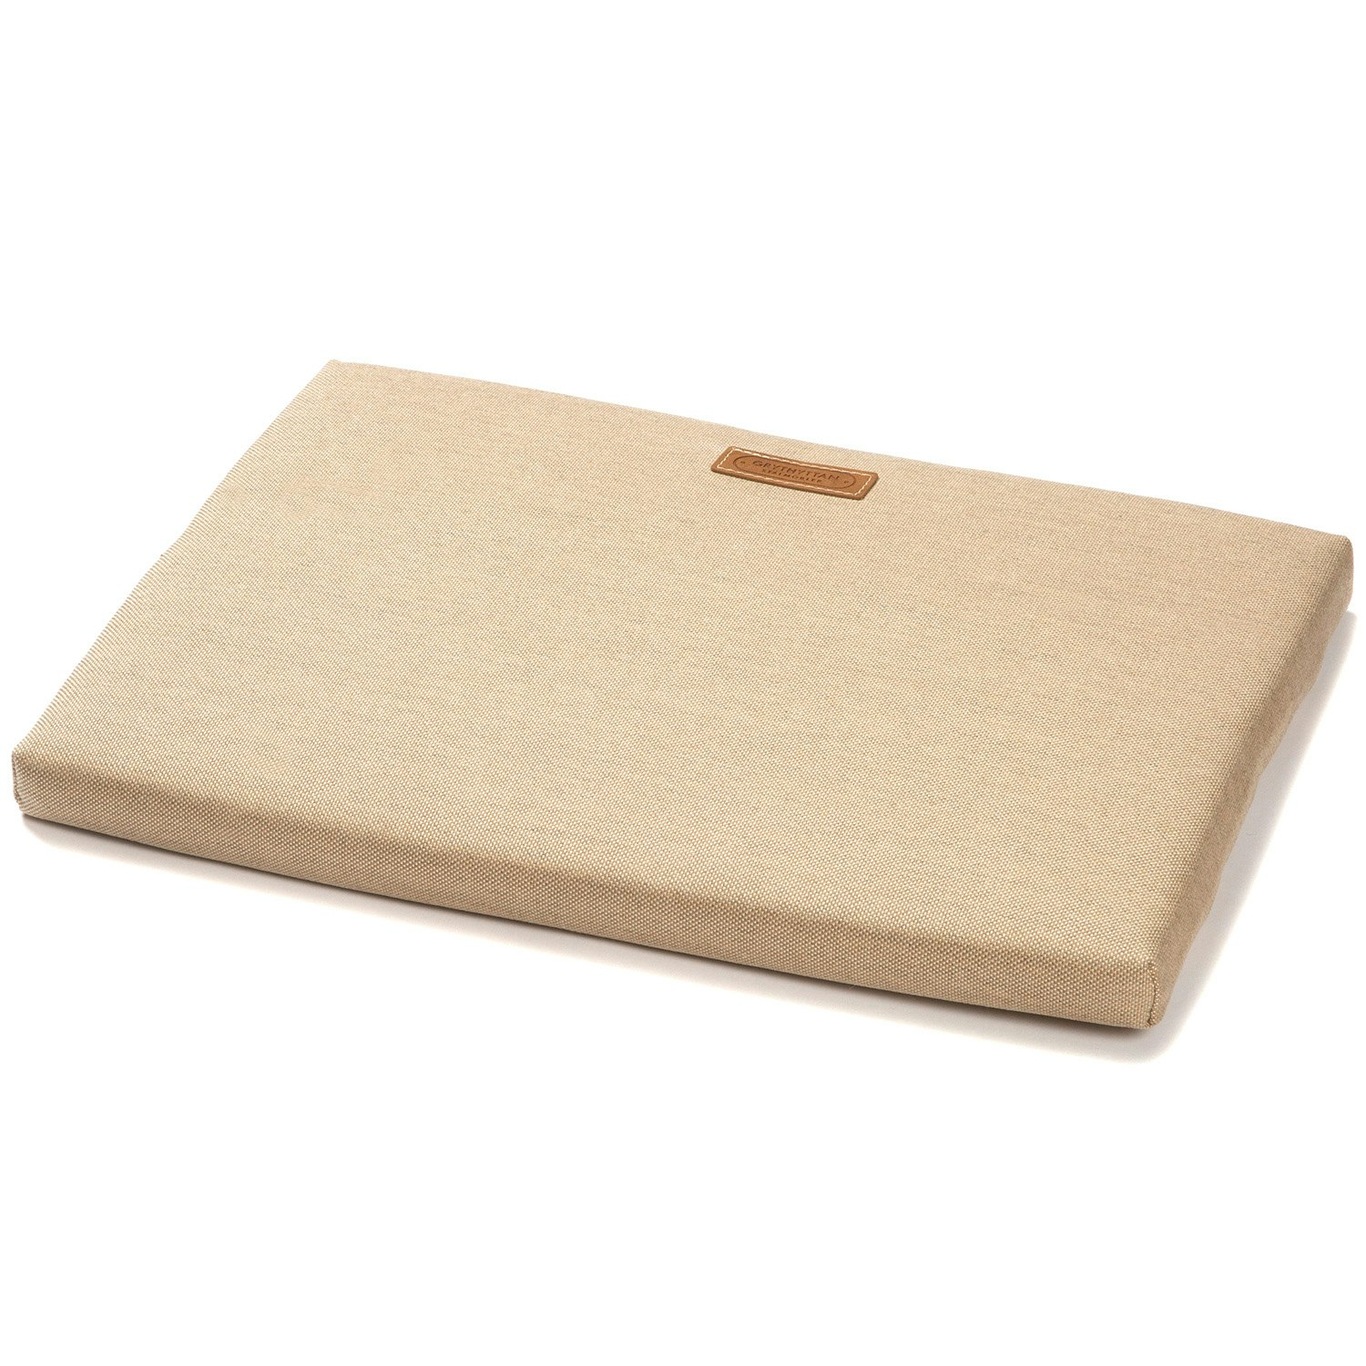 A3 Seat Cushion For Footstool, Beige